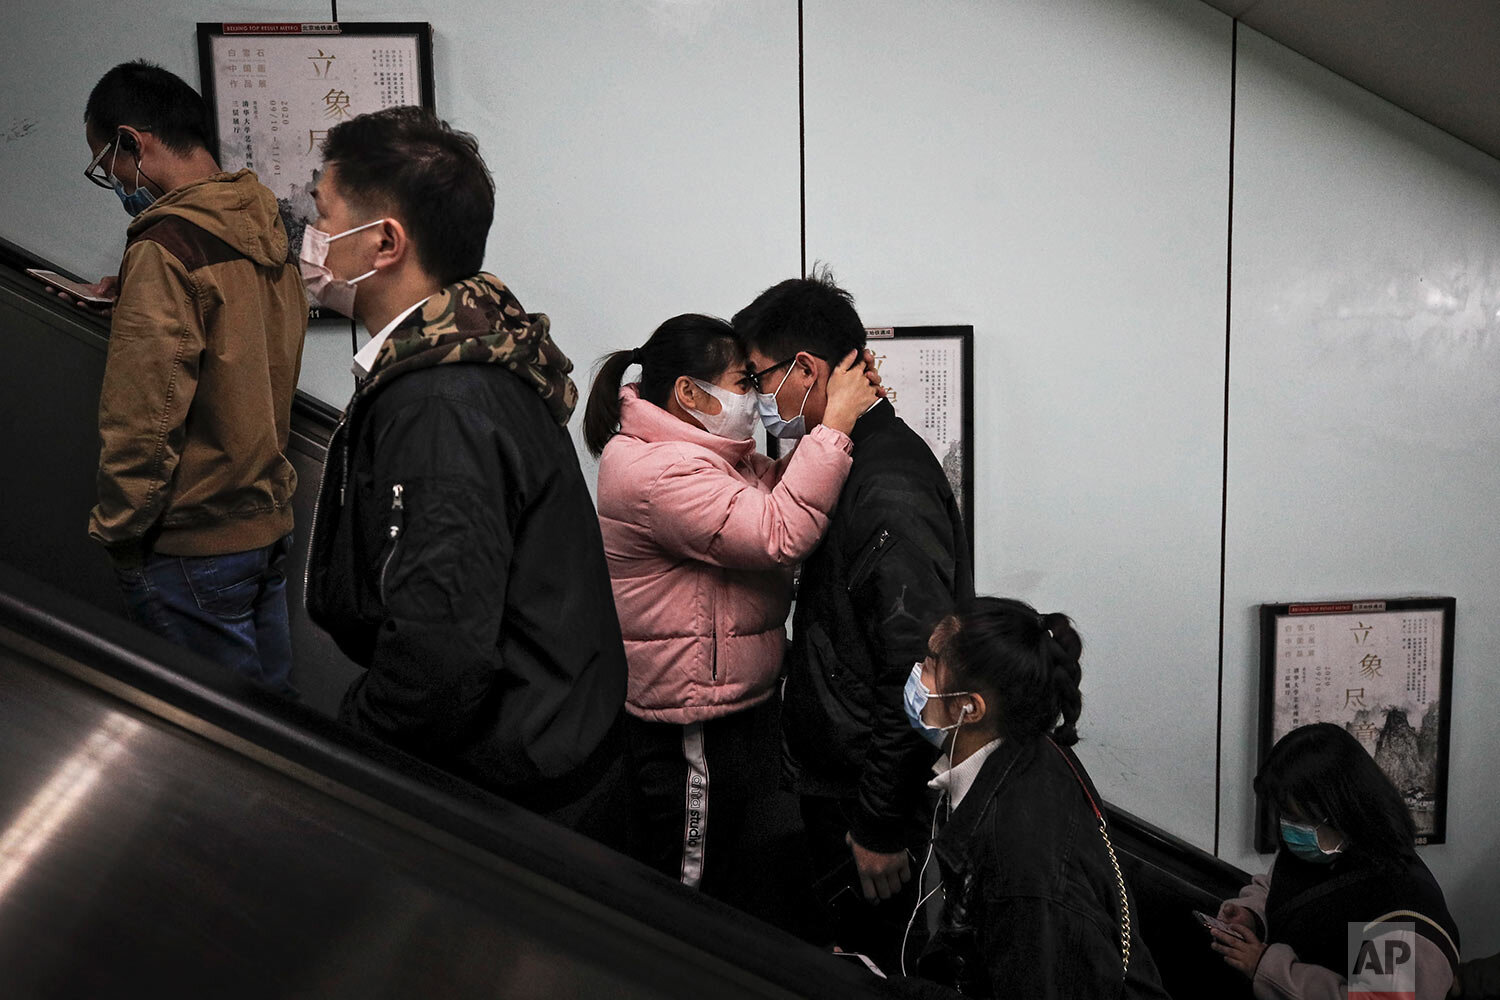  A couple wearing face masks to help curb the spread of the coronavirus embrace each other on an elevator as they exit a subway station with commuters during the morning rush hour in Beijing, Thursday, Oct. 29, 2020. (AP Photo/Andy Wong) 